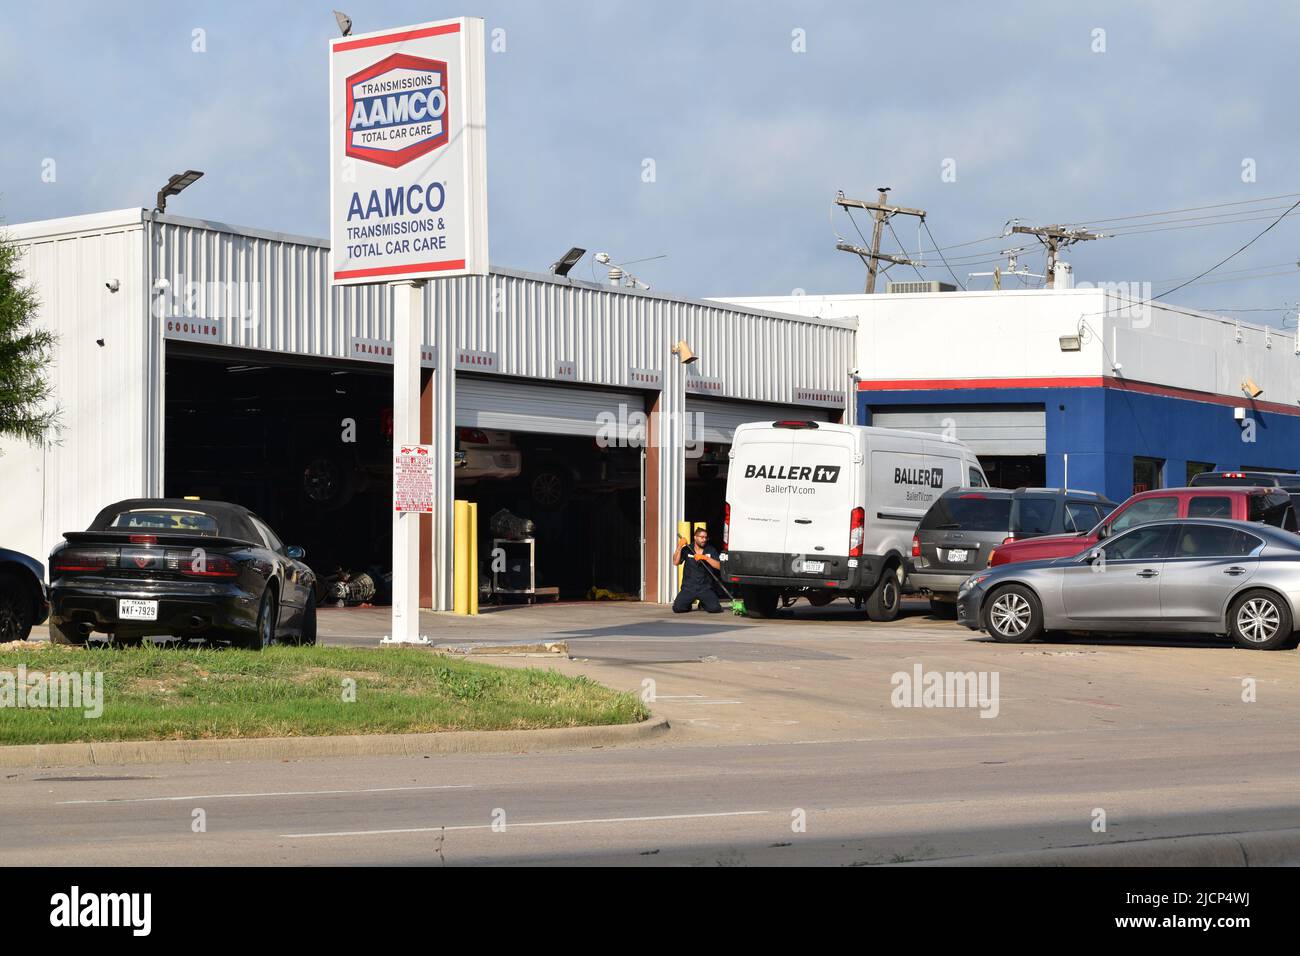 A mechanic using a jack to lift a work van outside an Aamco Transmissions and Total Car Care shop Stock Photo